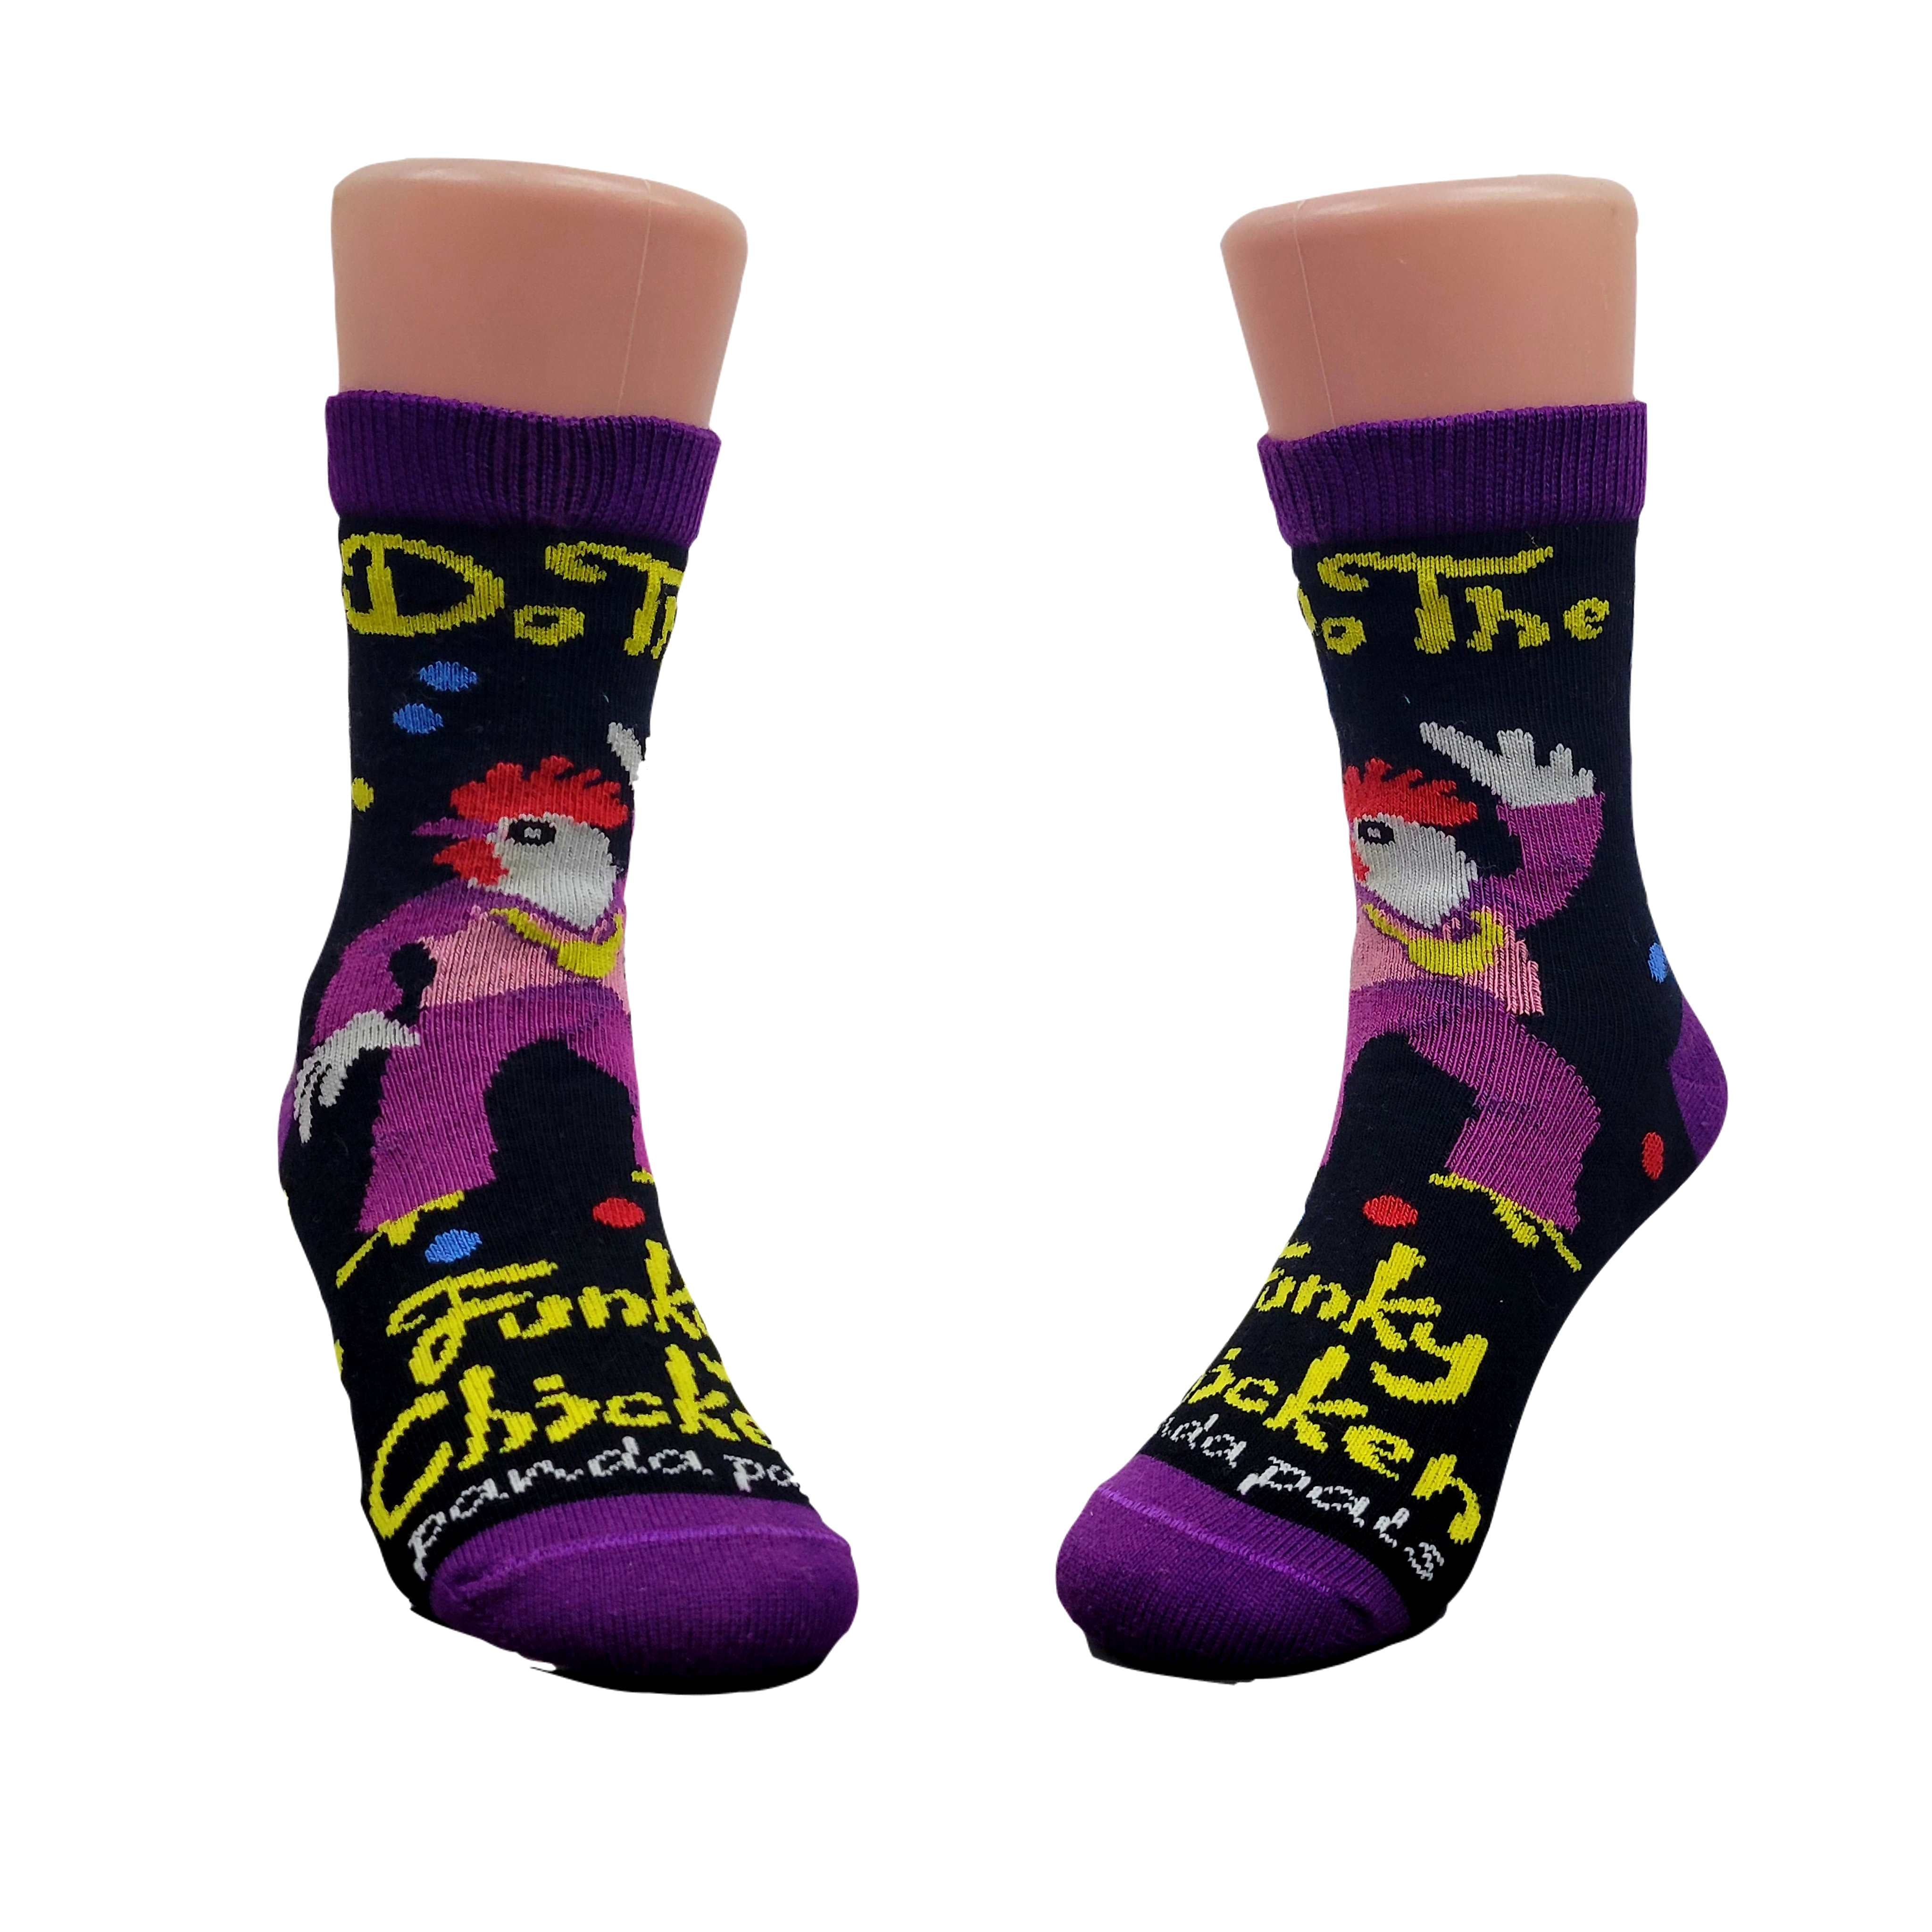 Funky Chicken Socks from the Sock Panda (Ages 3-5)